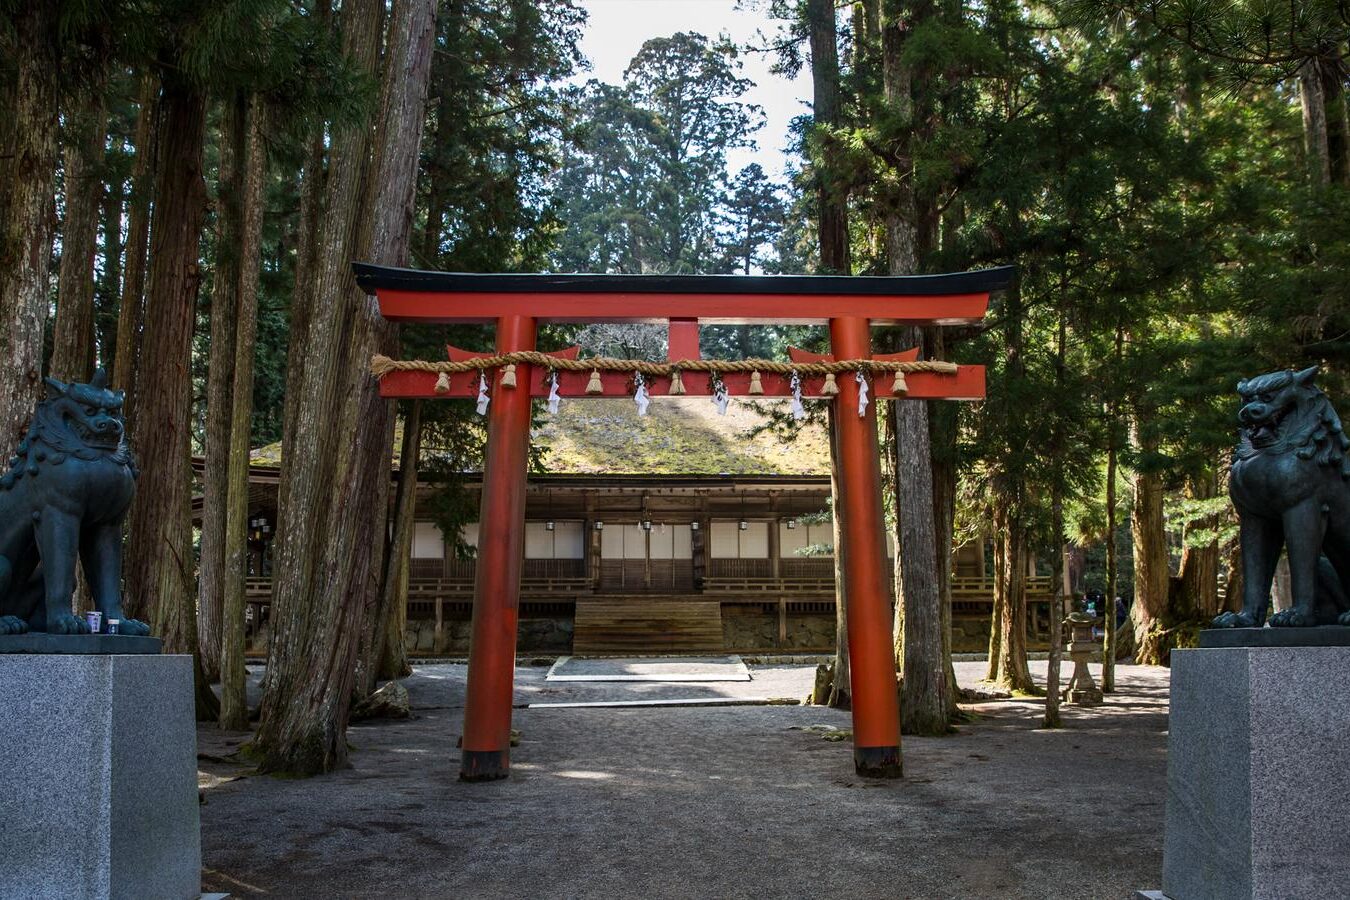 Entrance to a shrine in Japan